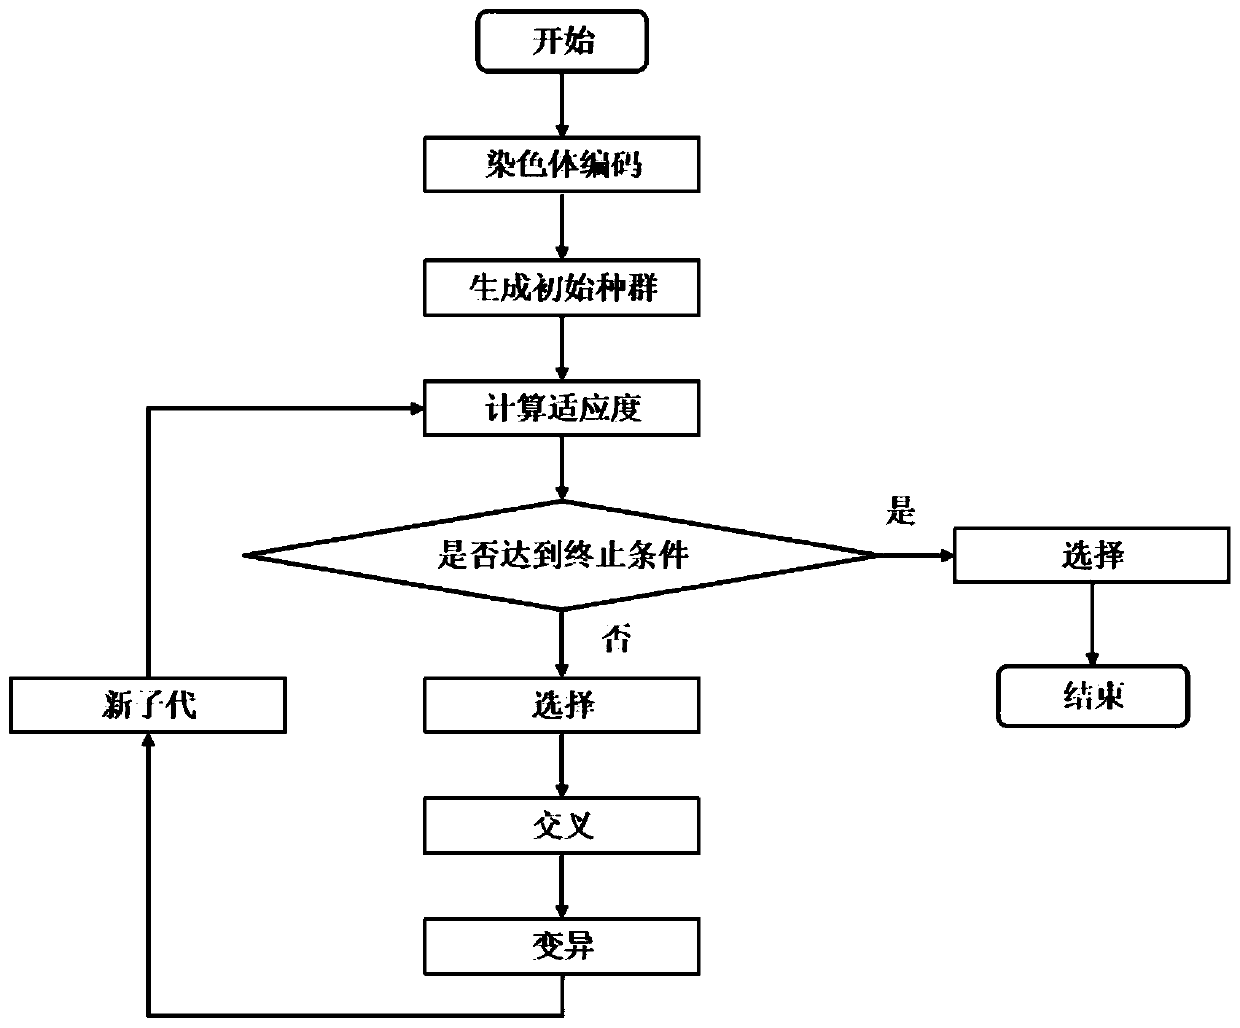 Express logistics process state detection multi-classification system